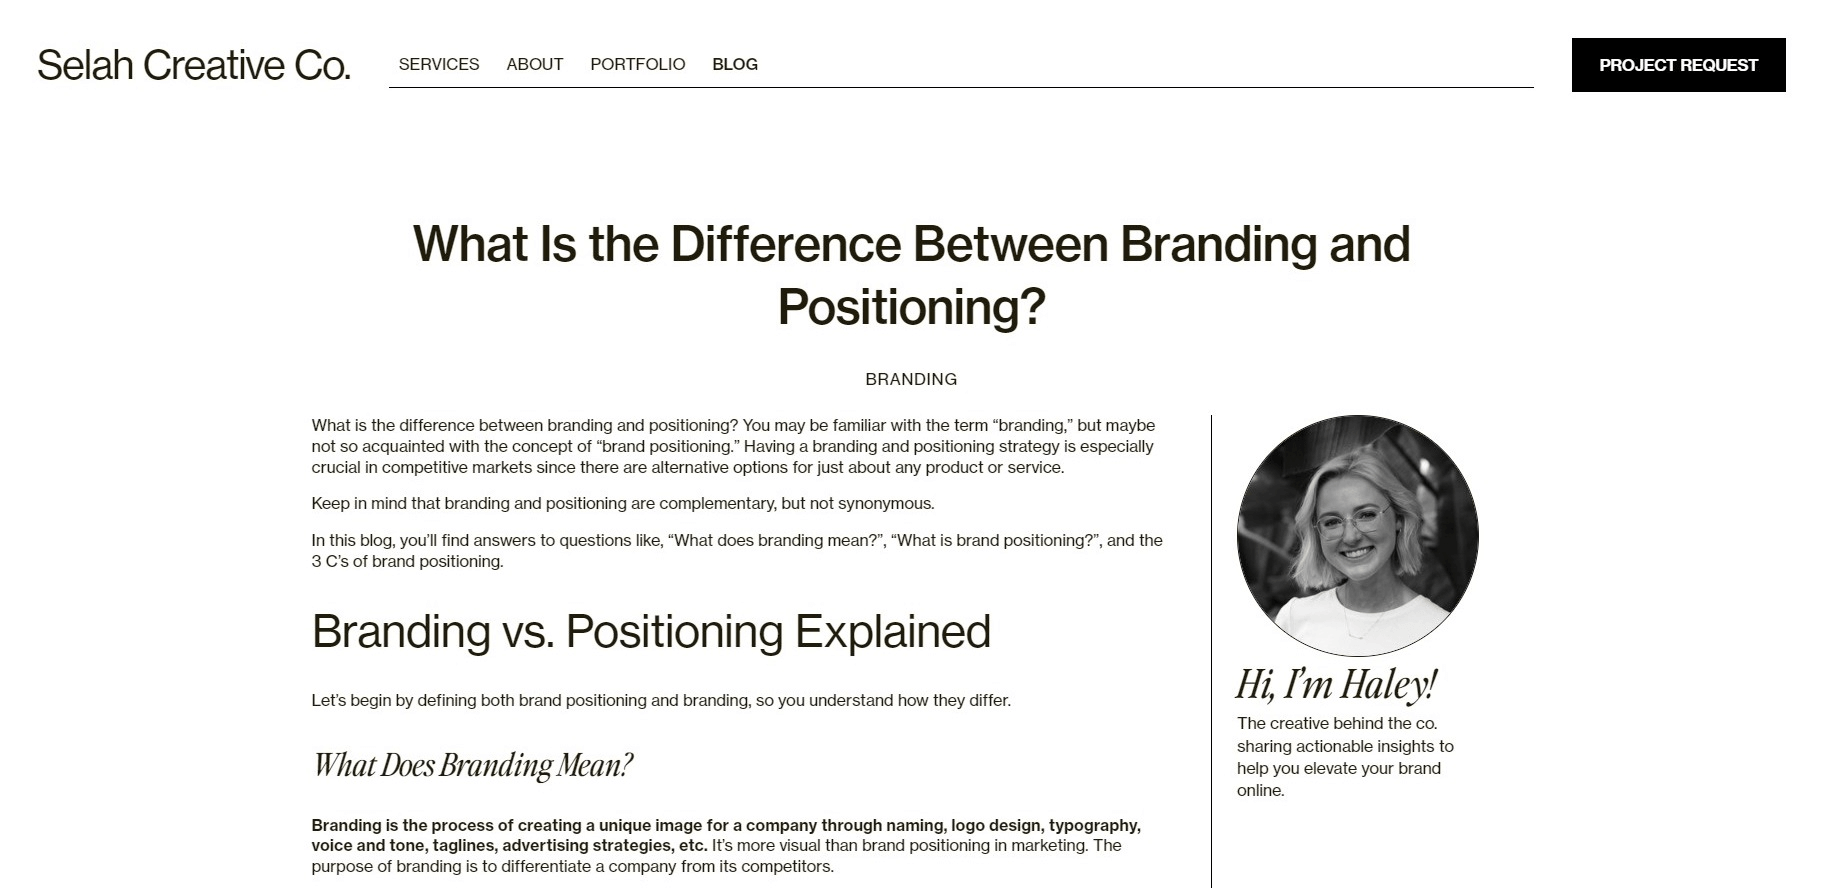 Blog post from Selah Creative Co. discussing the difference between branding and positioning, with a headshot of Haley, the blog author.